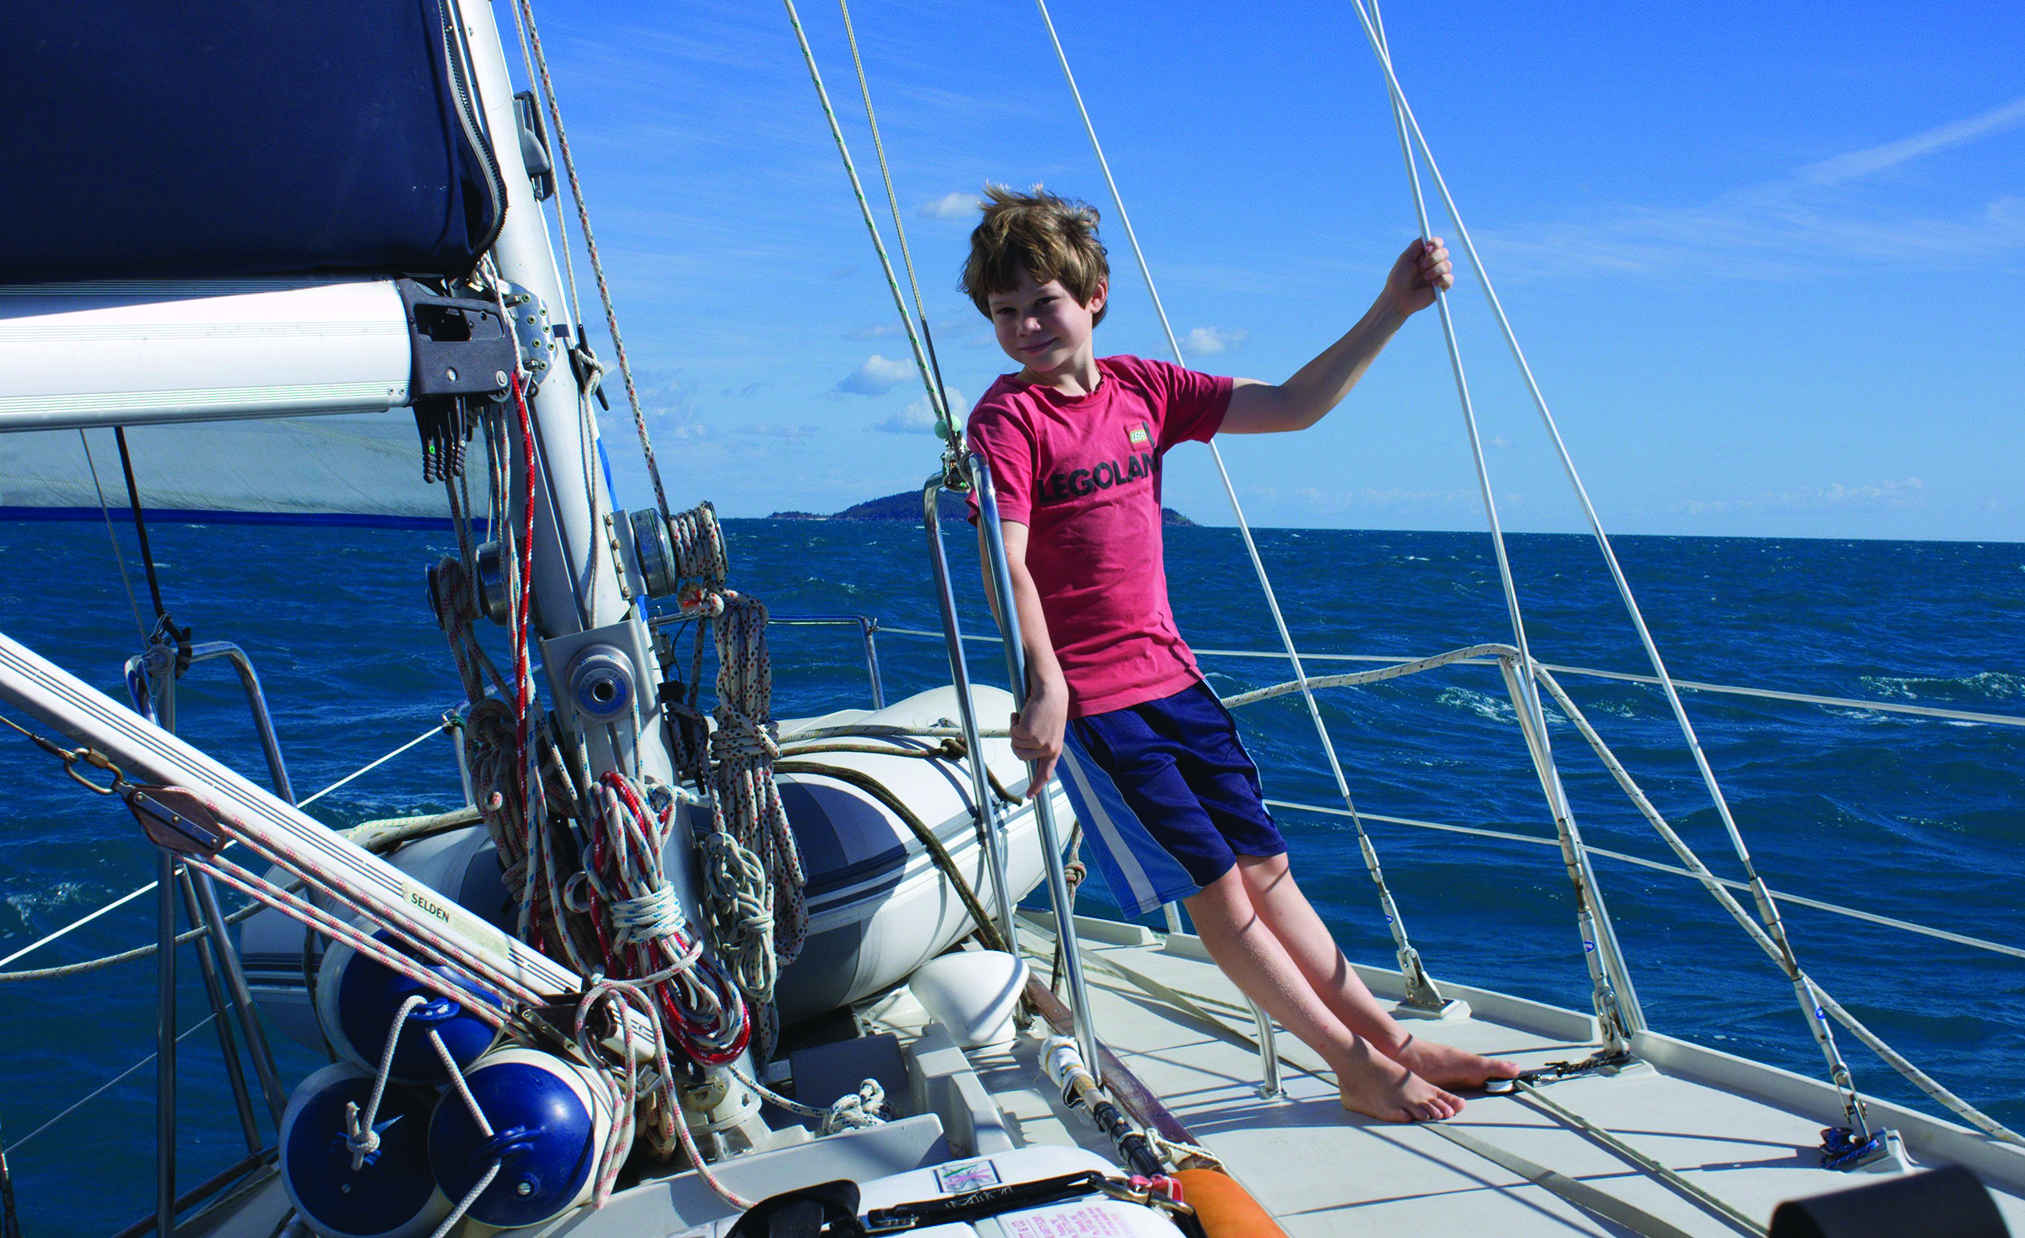 Savoring every moment of the quiet sailing life